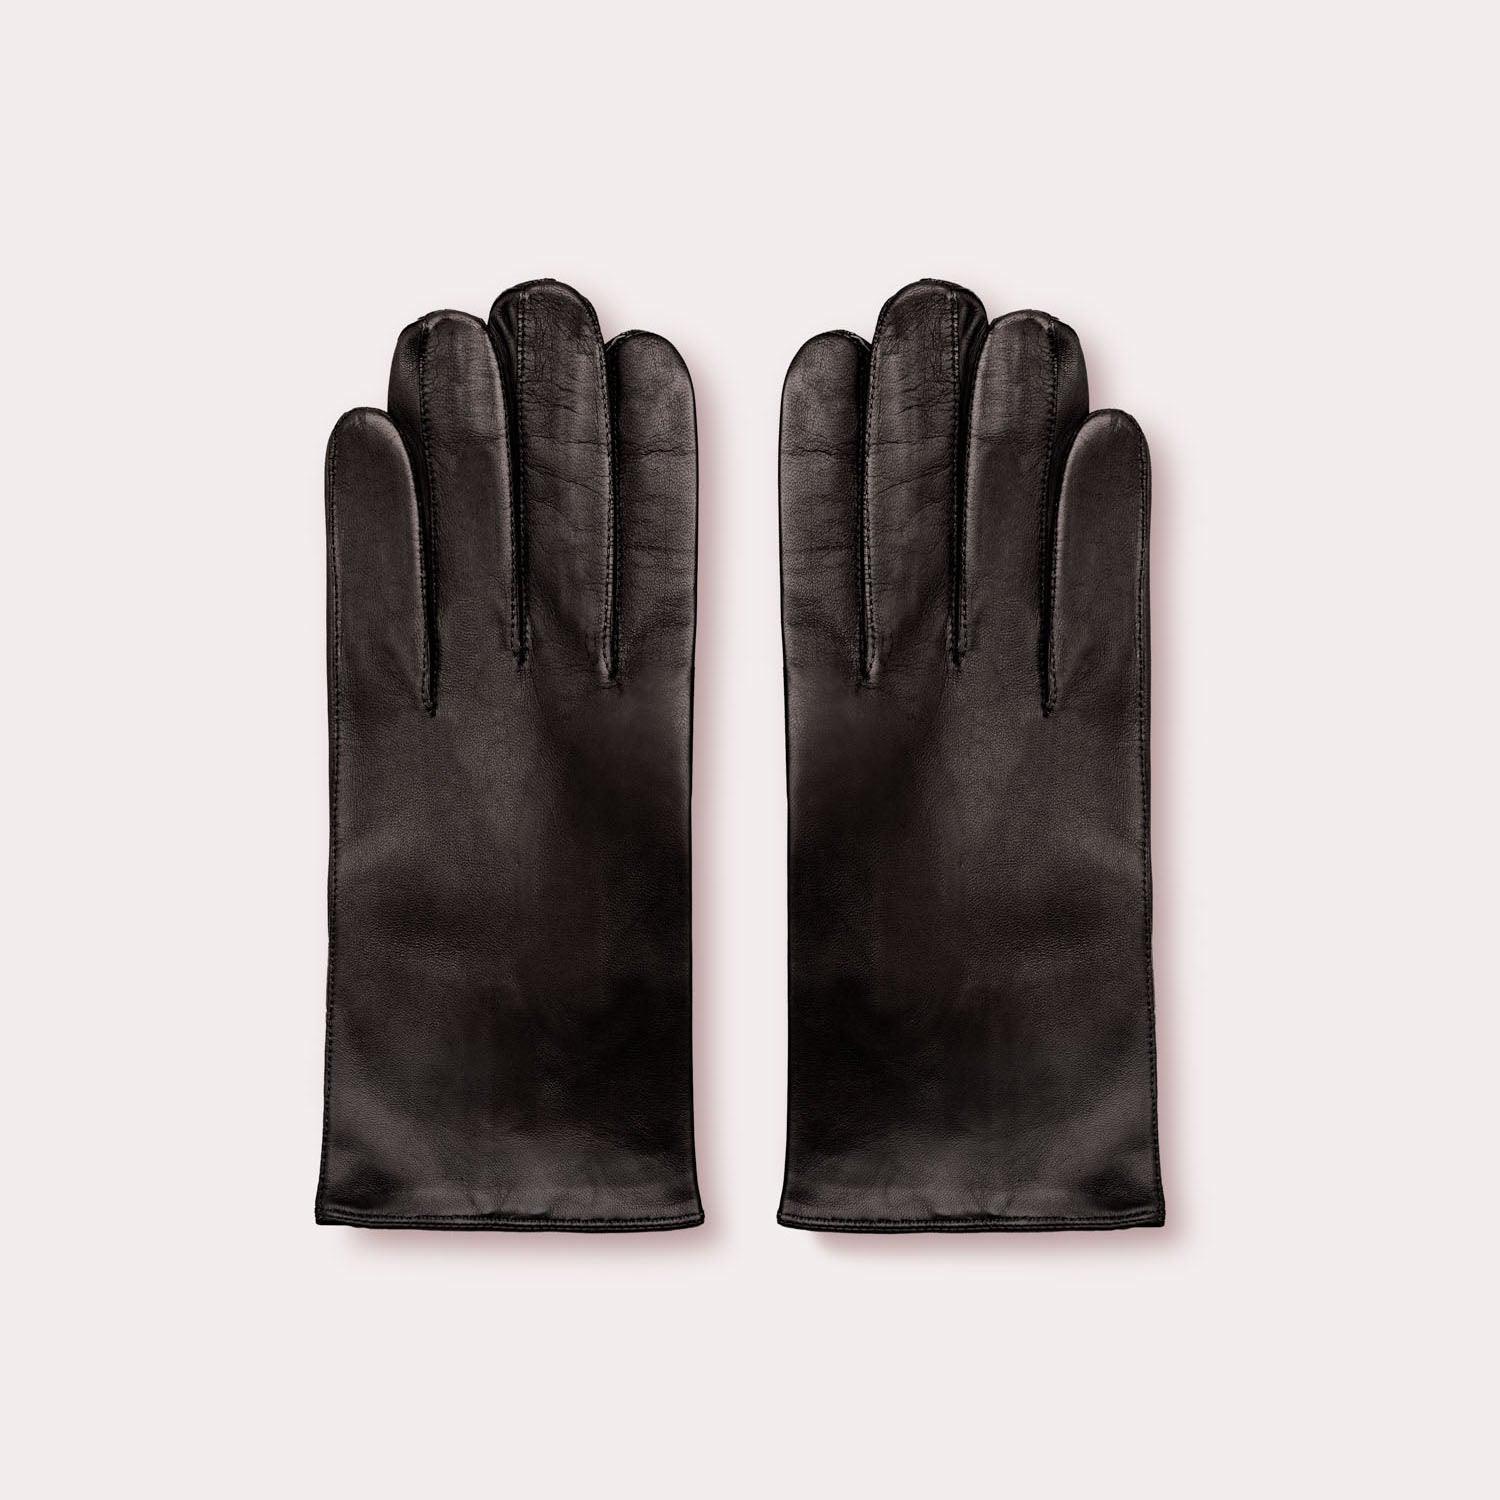 Men's Grant Glove with Cashmere Lining, black leather gloves.